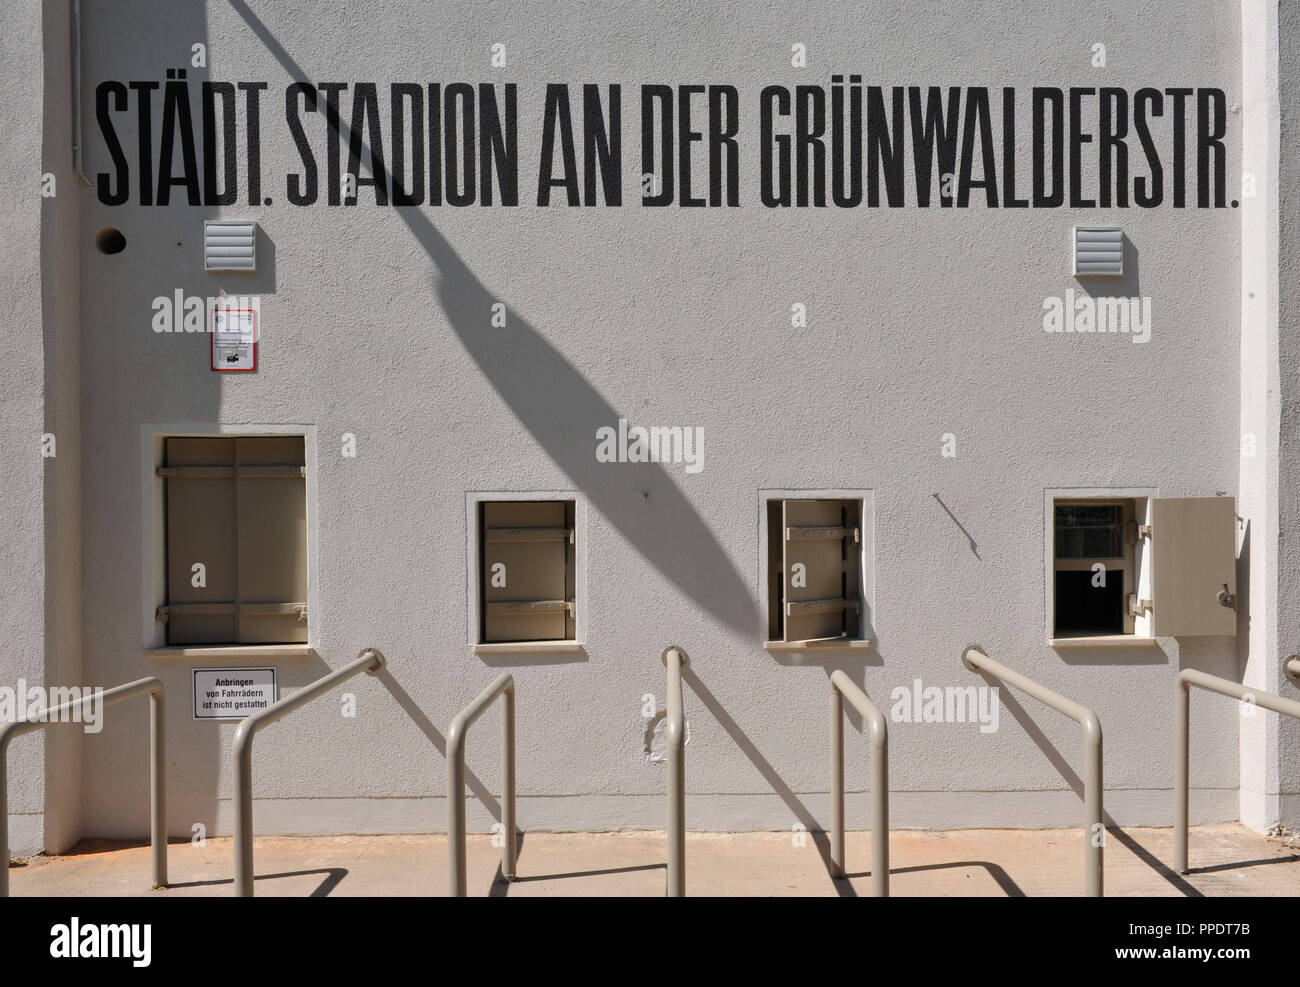 The renovation of the Staedtisches Stadion an der Gruenwalder Strasse ('60er Stadion') in Giesing is almost finished. The picture shows the ticket offices of the stadium. Stock Photo